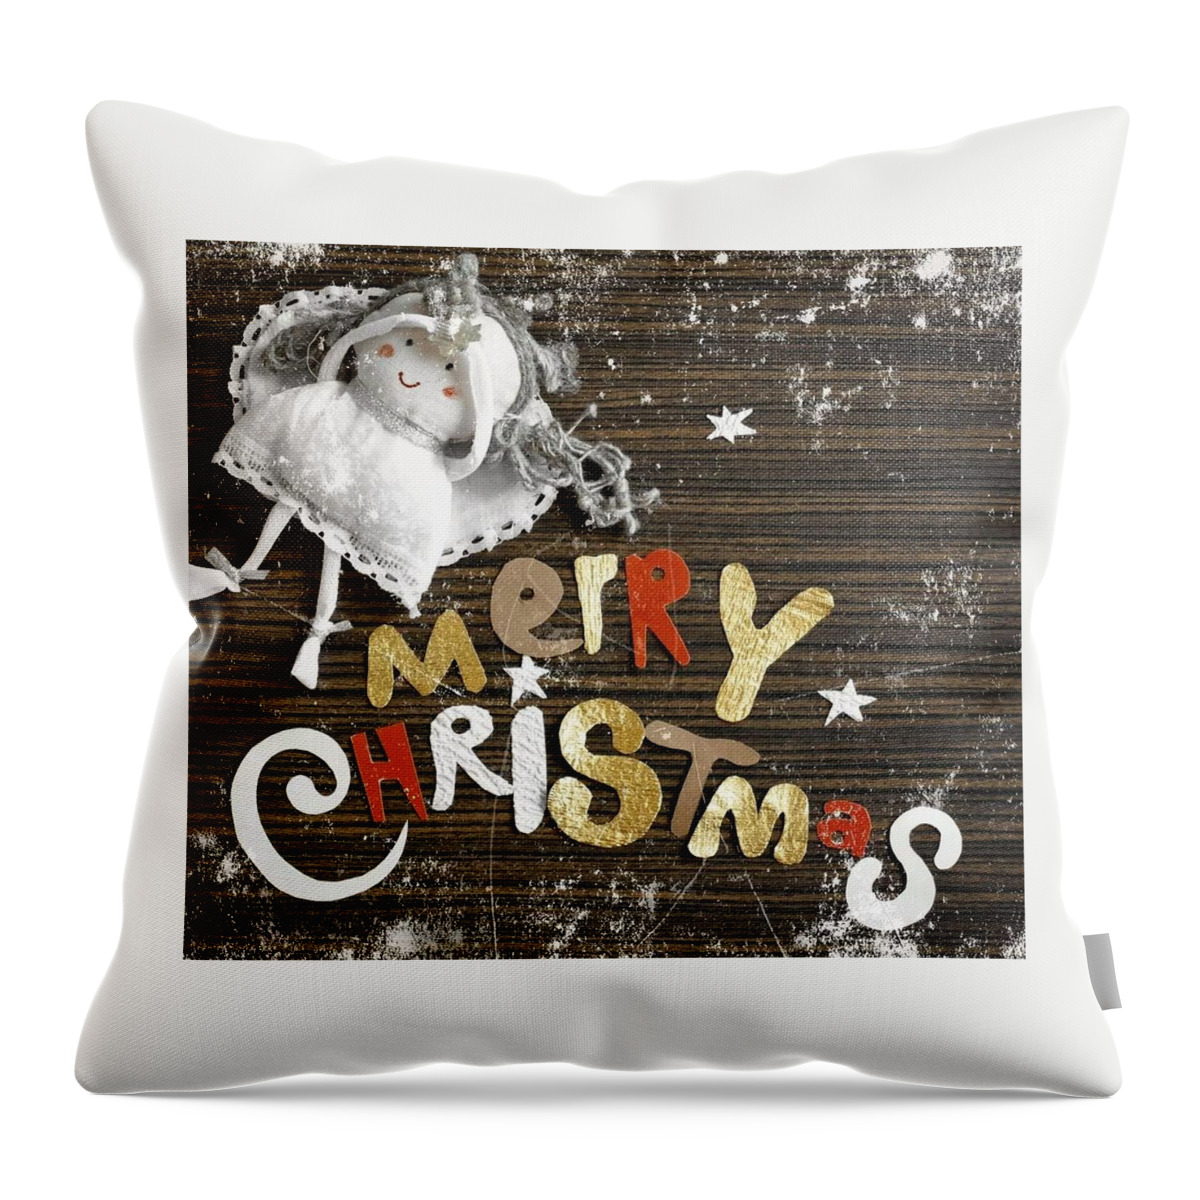  Throw Pillow featuring the painting Merry christmas by Mohammad saquib Shakoor